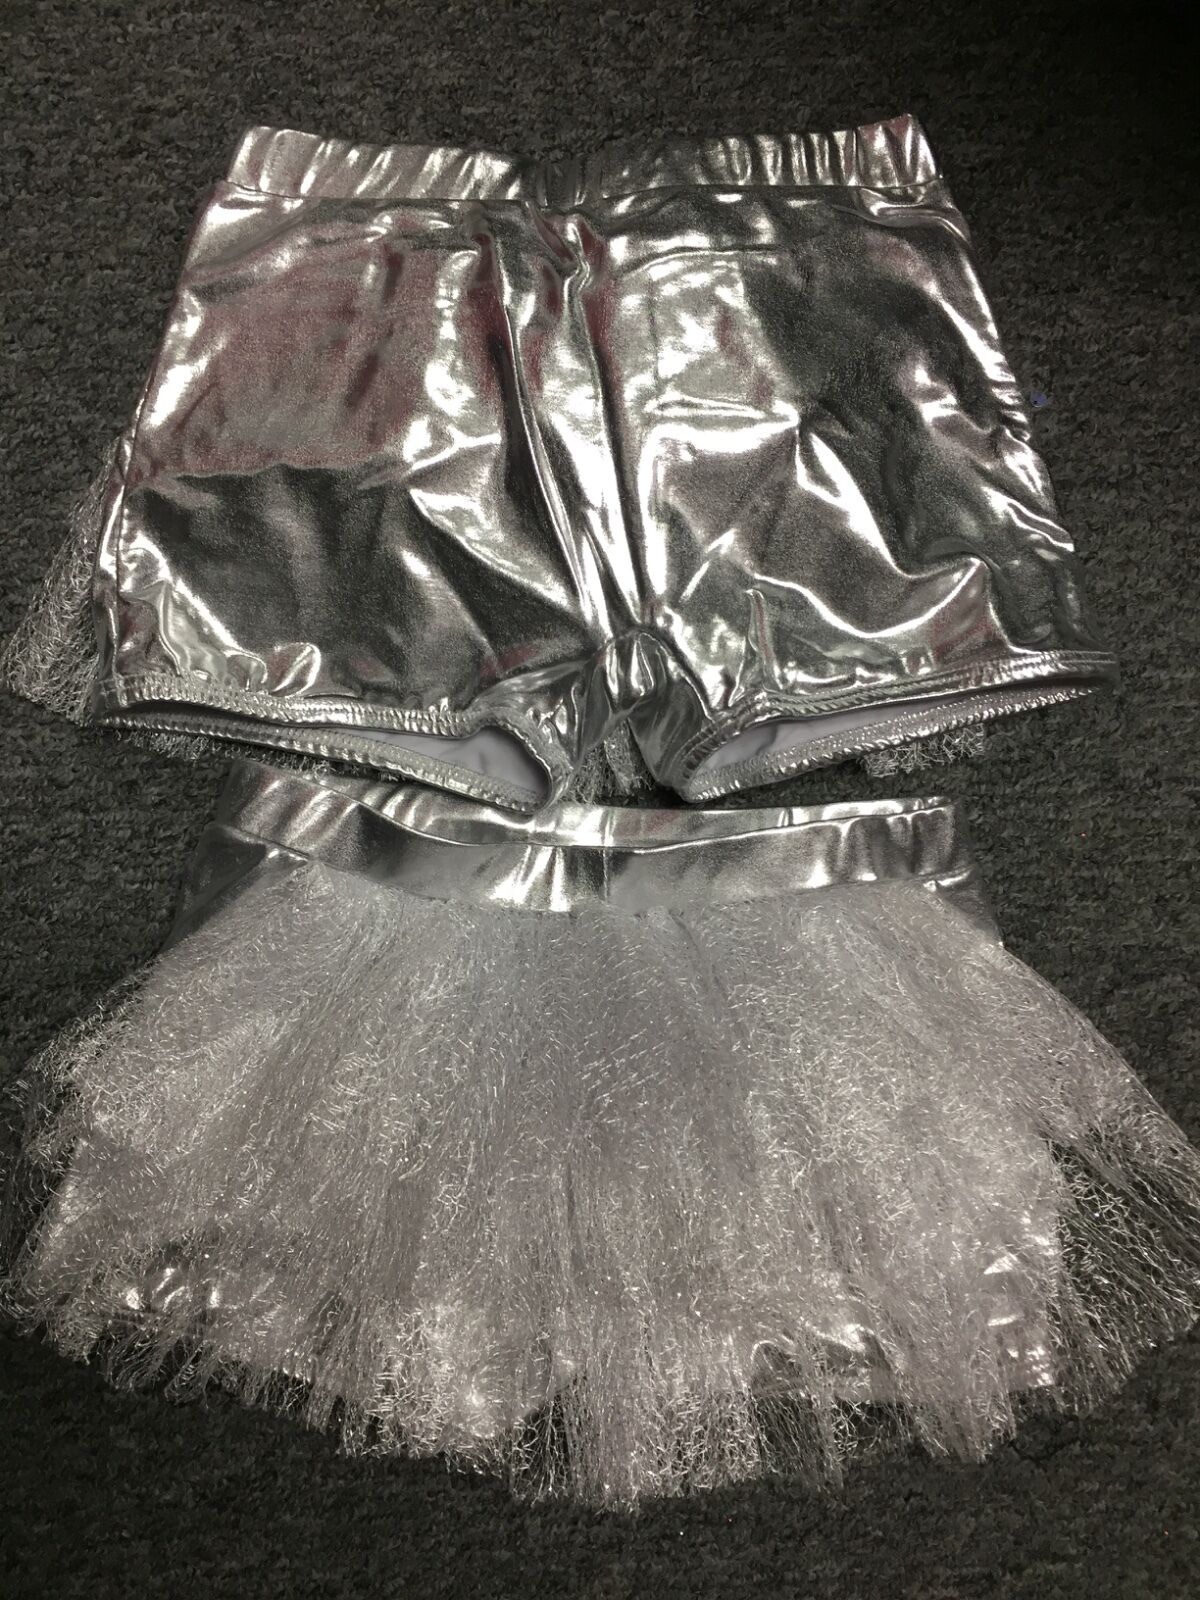 Dance Shorts Silver W/ Tulle Bustle Lot Of 11 Sizes Mc (4) Lc (4) Sa (3)